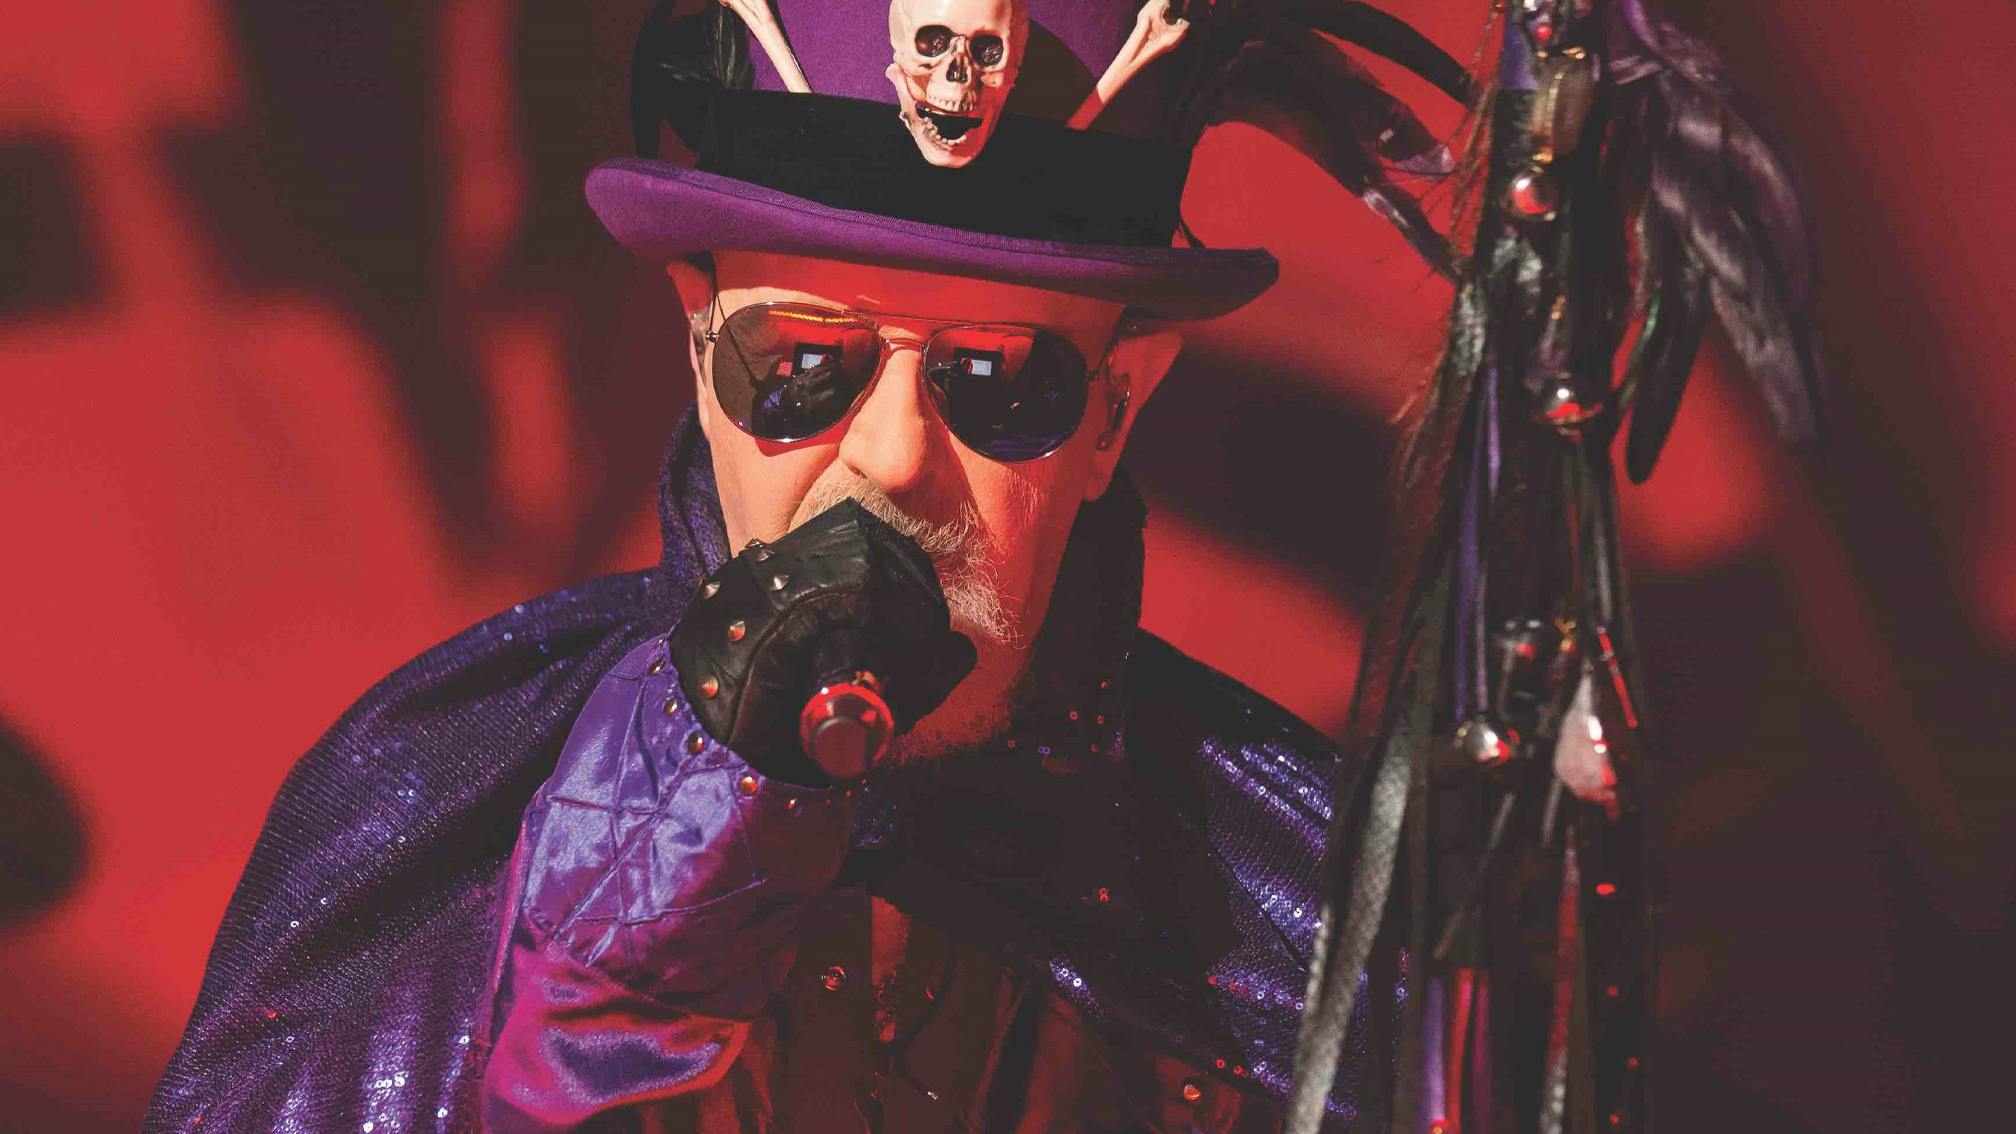 Judas Priest’s Rob Halford: My life in 10 songs